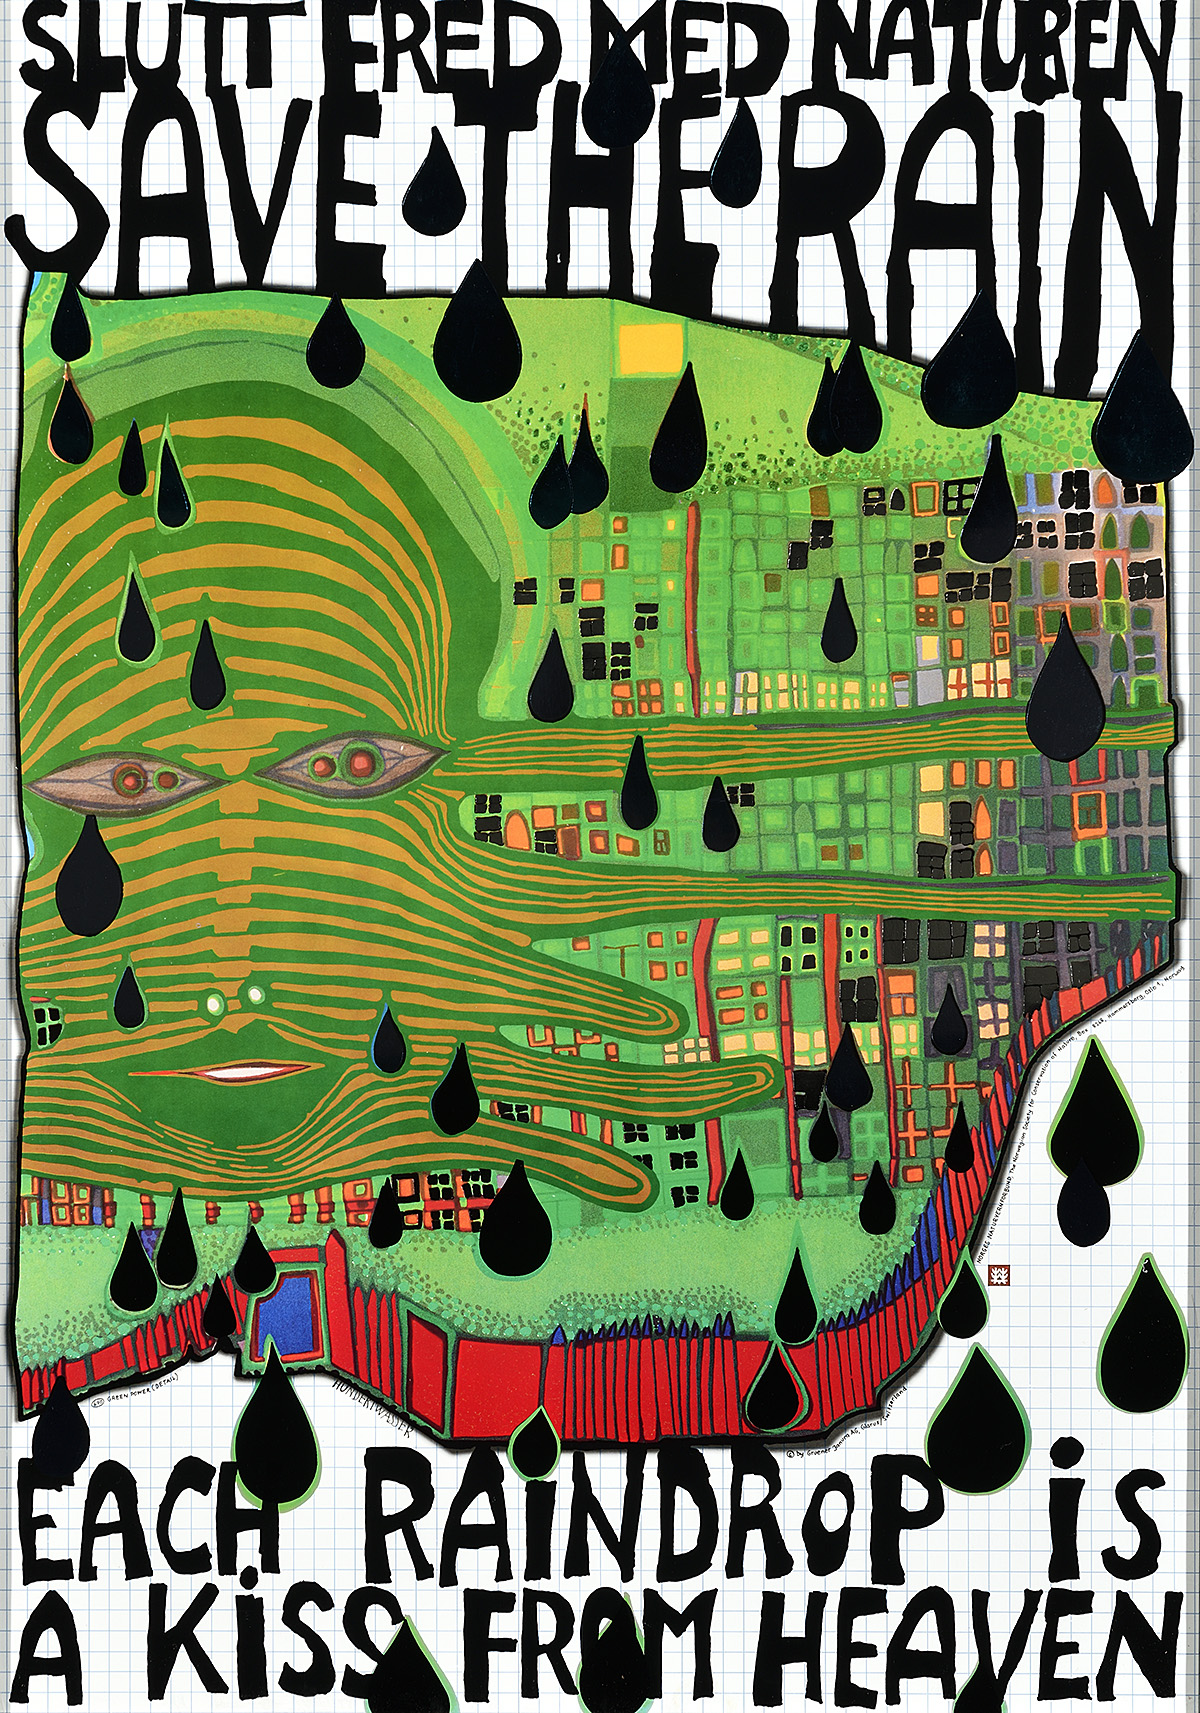 A poster of a green face made of tree roots spreading over a landscape, covered by black raindrops.